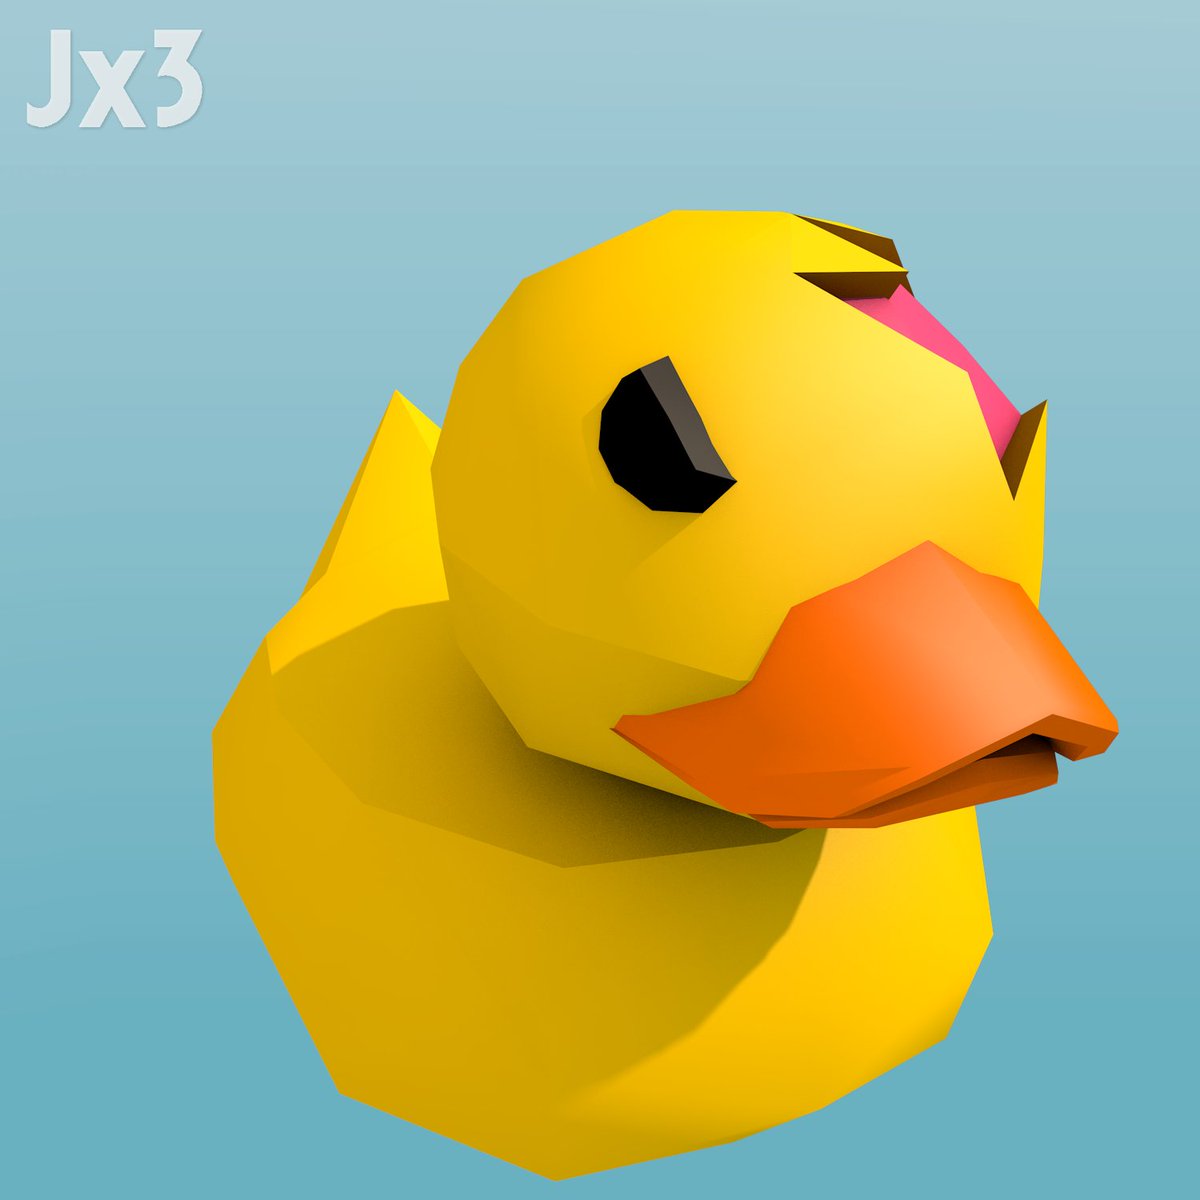 Jaz On Twitter Made A Rubber Duck For Toy Defense Tycoon Roblox Robloxdev Roblox Robloxdevrel